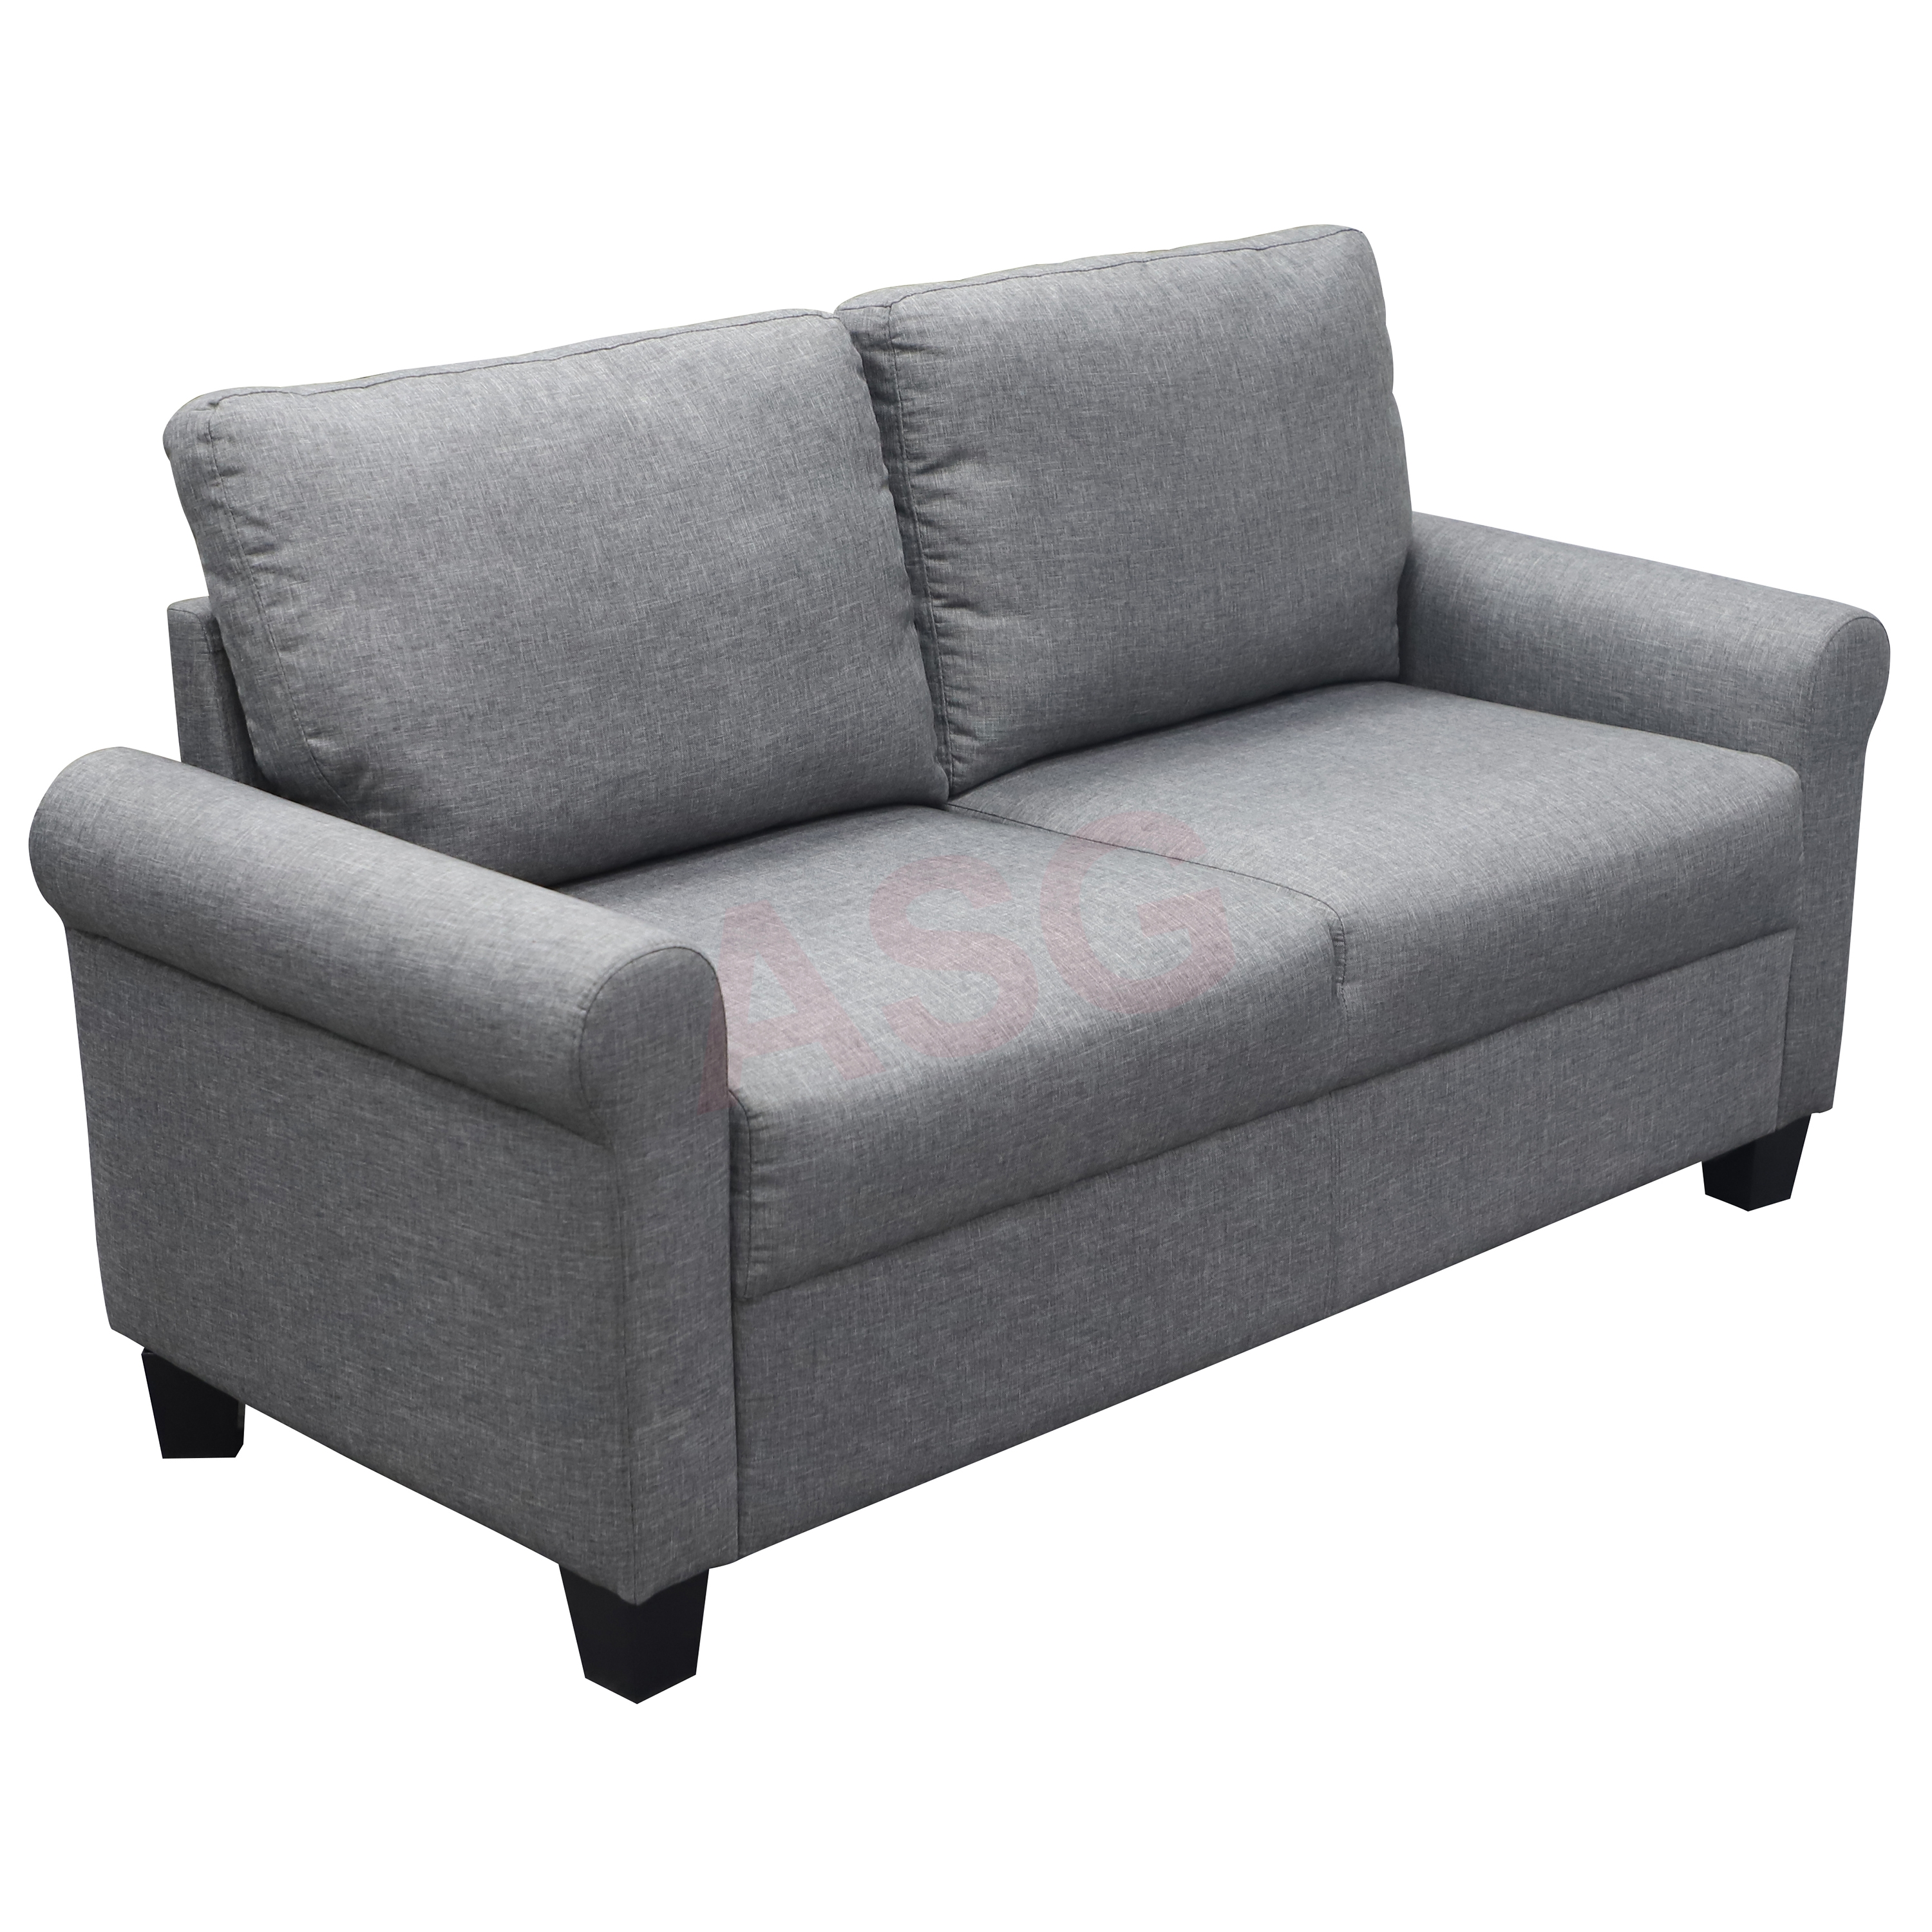 Ehot 2 Seater Sofabed